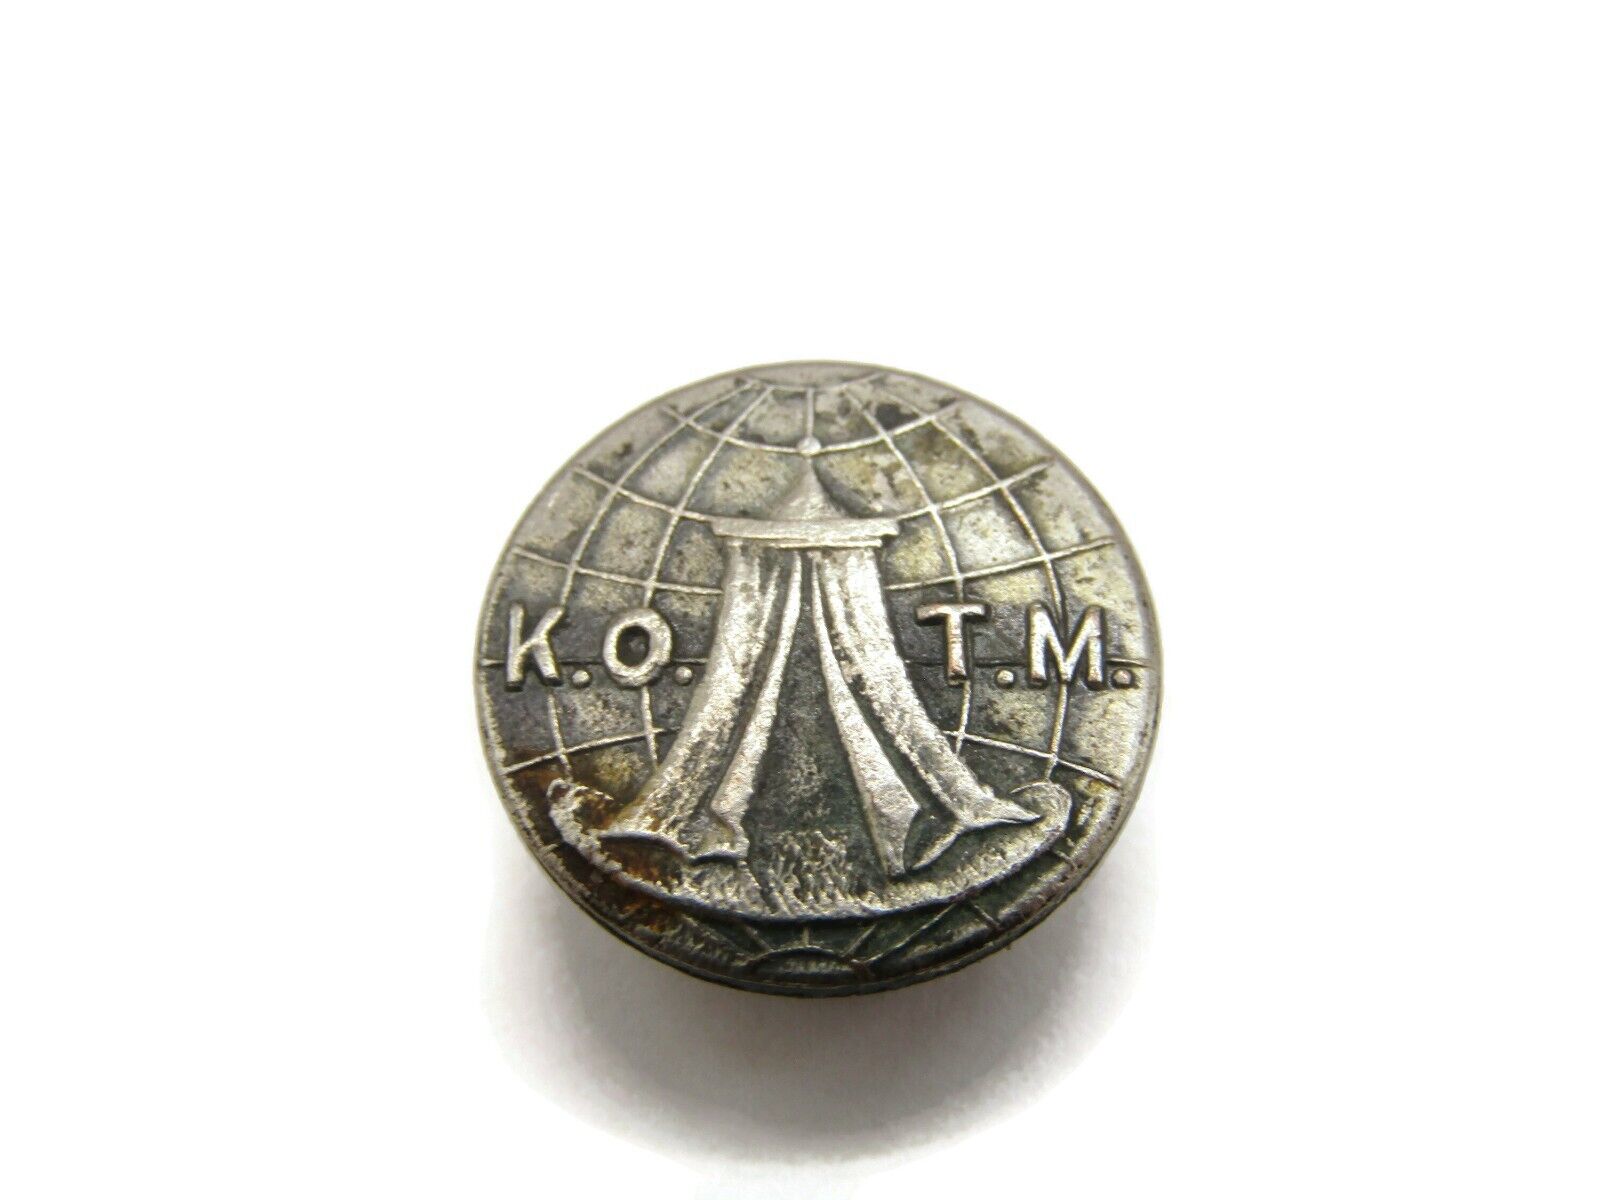 KOTM K.O.T.M. Knights of the Maccabees Buttonhole Pin Antique Vintage